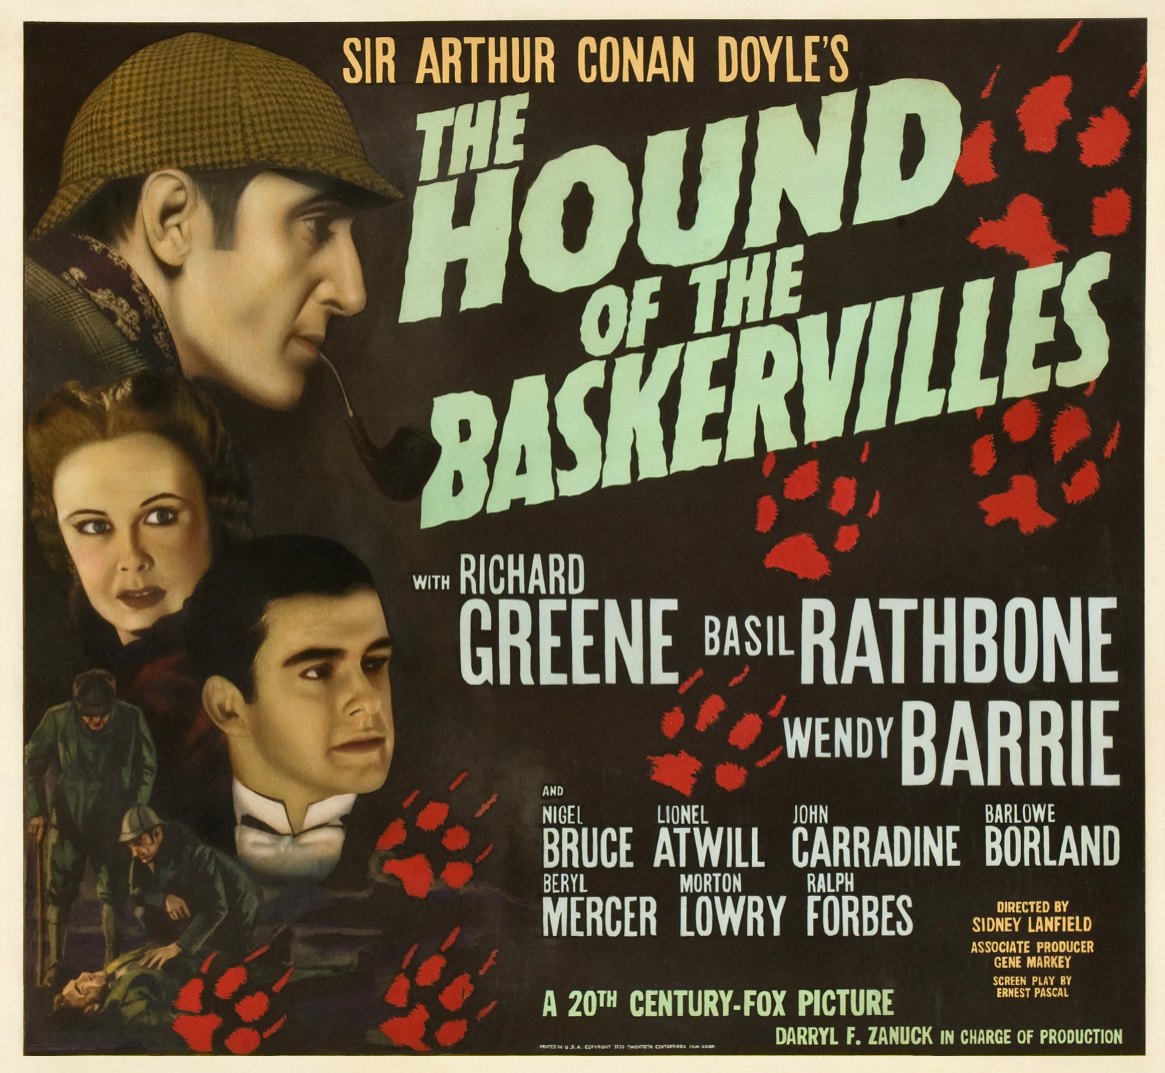 High Resolution Wallpaper | The Hound Of The Baskervilles 1165x1073 px